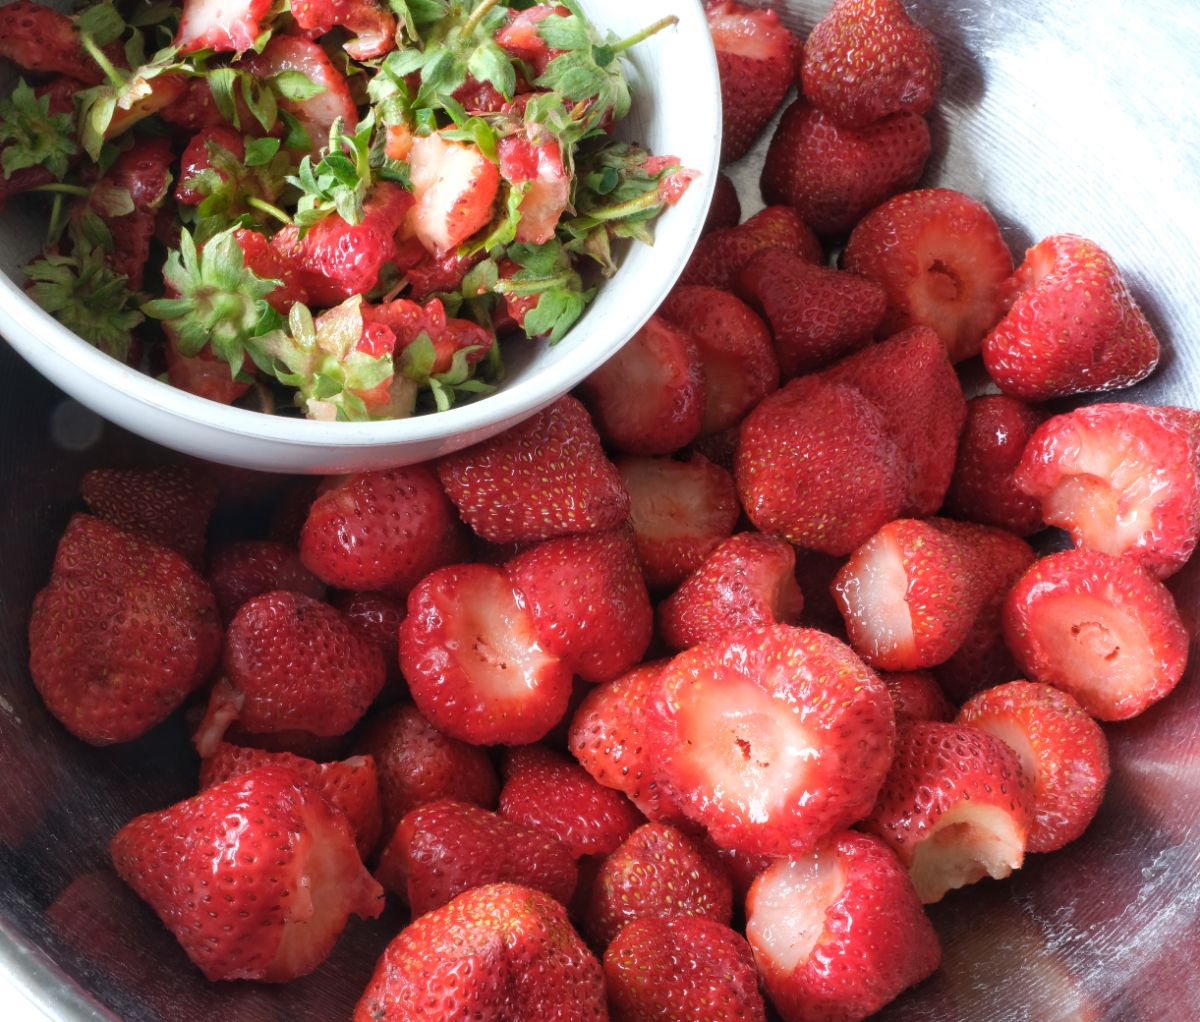 Hulled strawberries next to bowl full of remaints